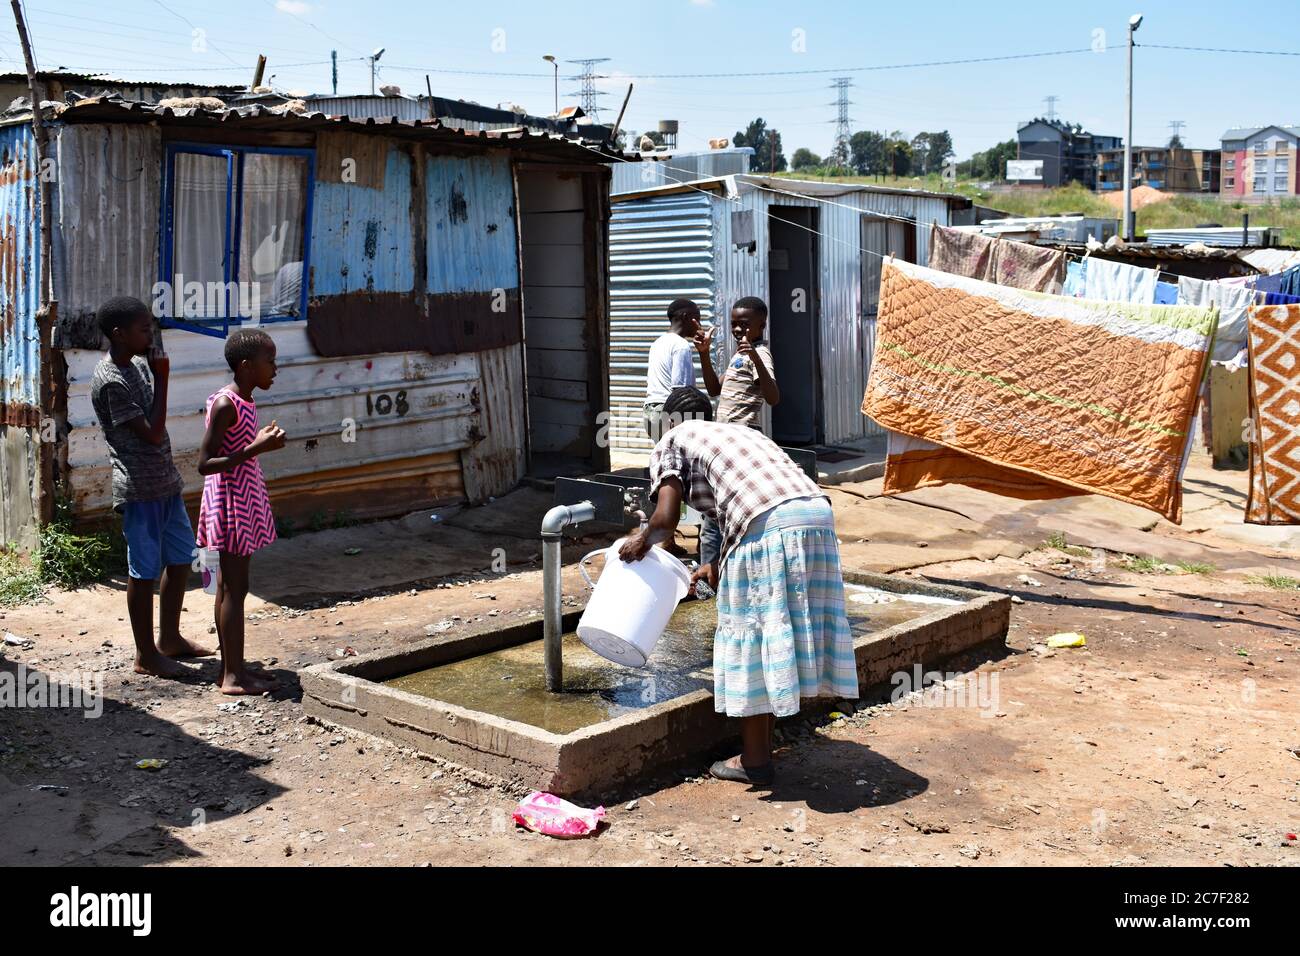 A mother fills a bucket of water from a tap as her children look on in a slum in Soweto, Johannesburg. Clothing and bedding drying on the washing line Stock Photo